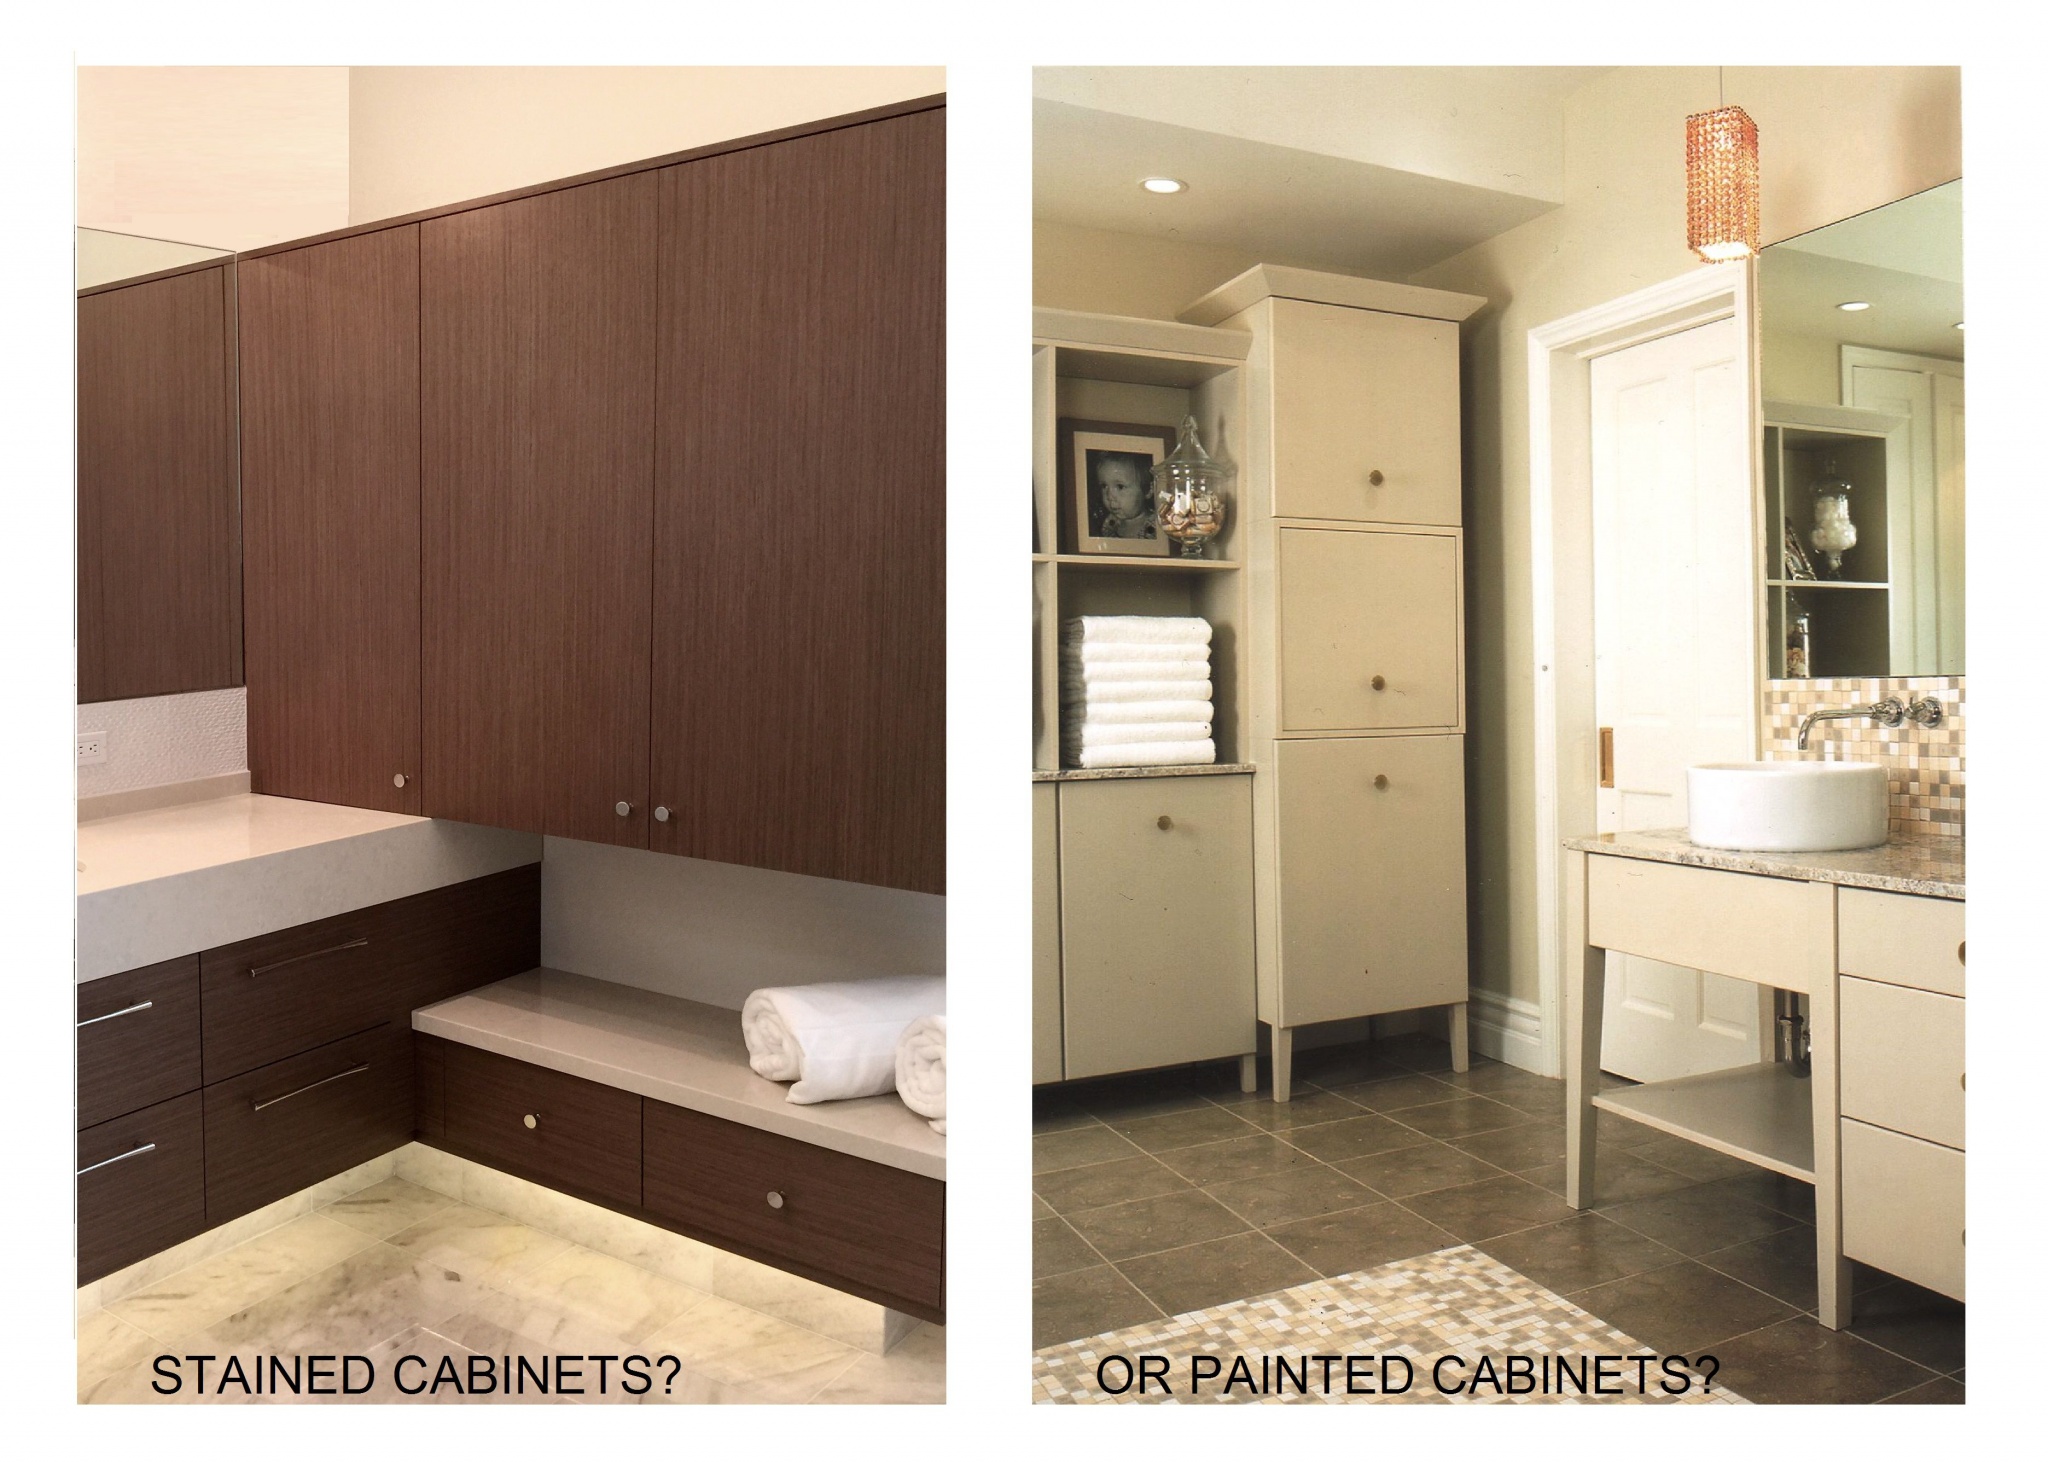 BATHROOM CABINETS: STAINED OR PAINTED?